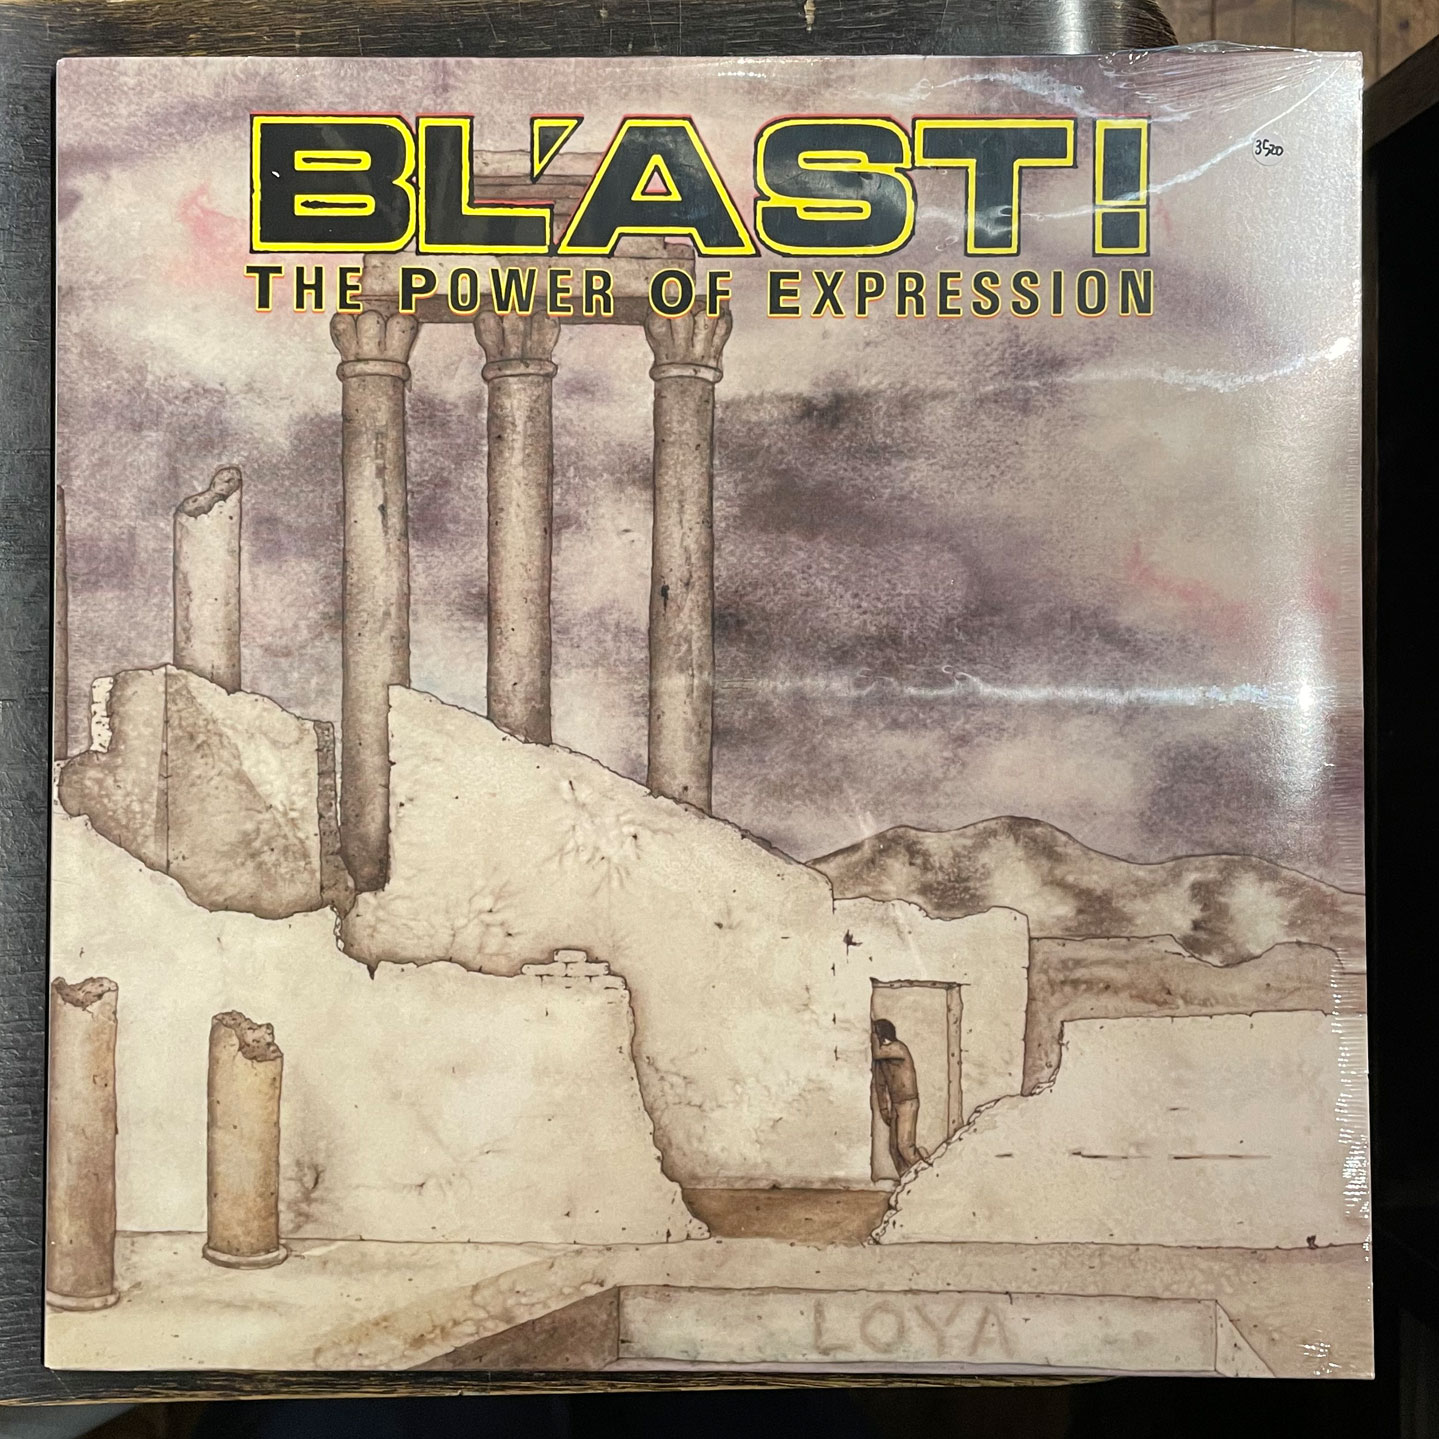 BL'AST! 12” LP THE POWER OF EXPRESSION